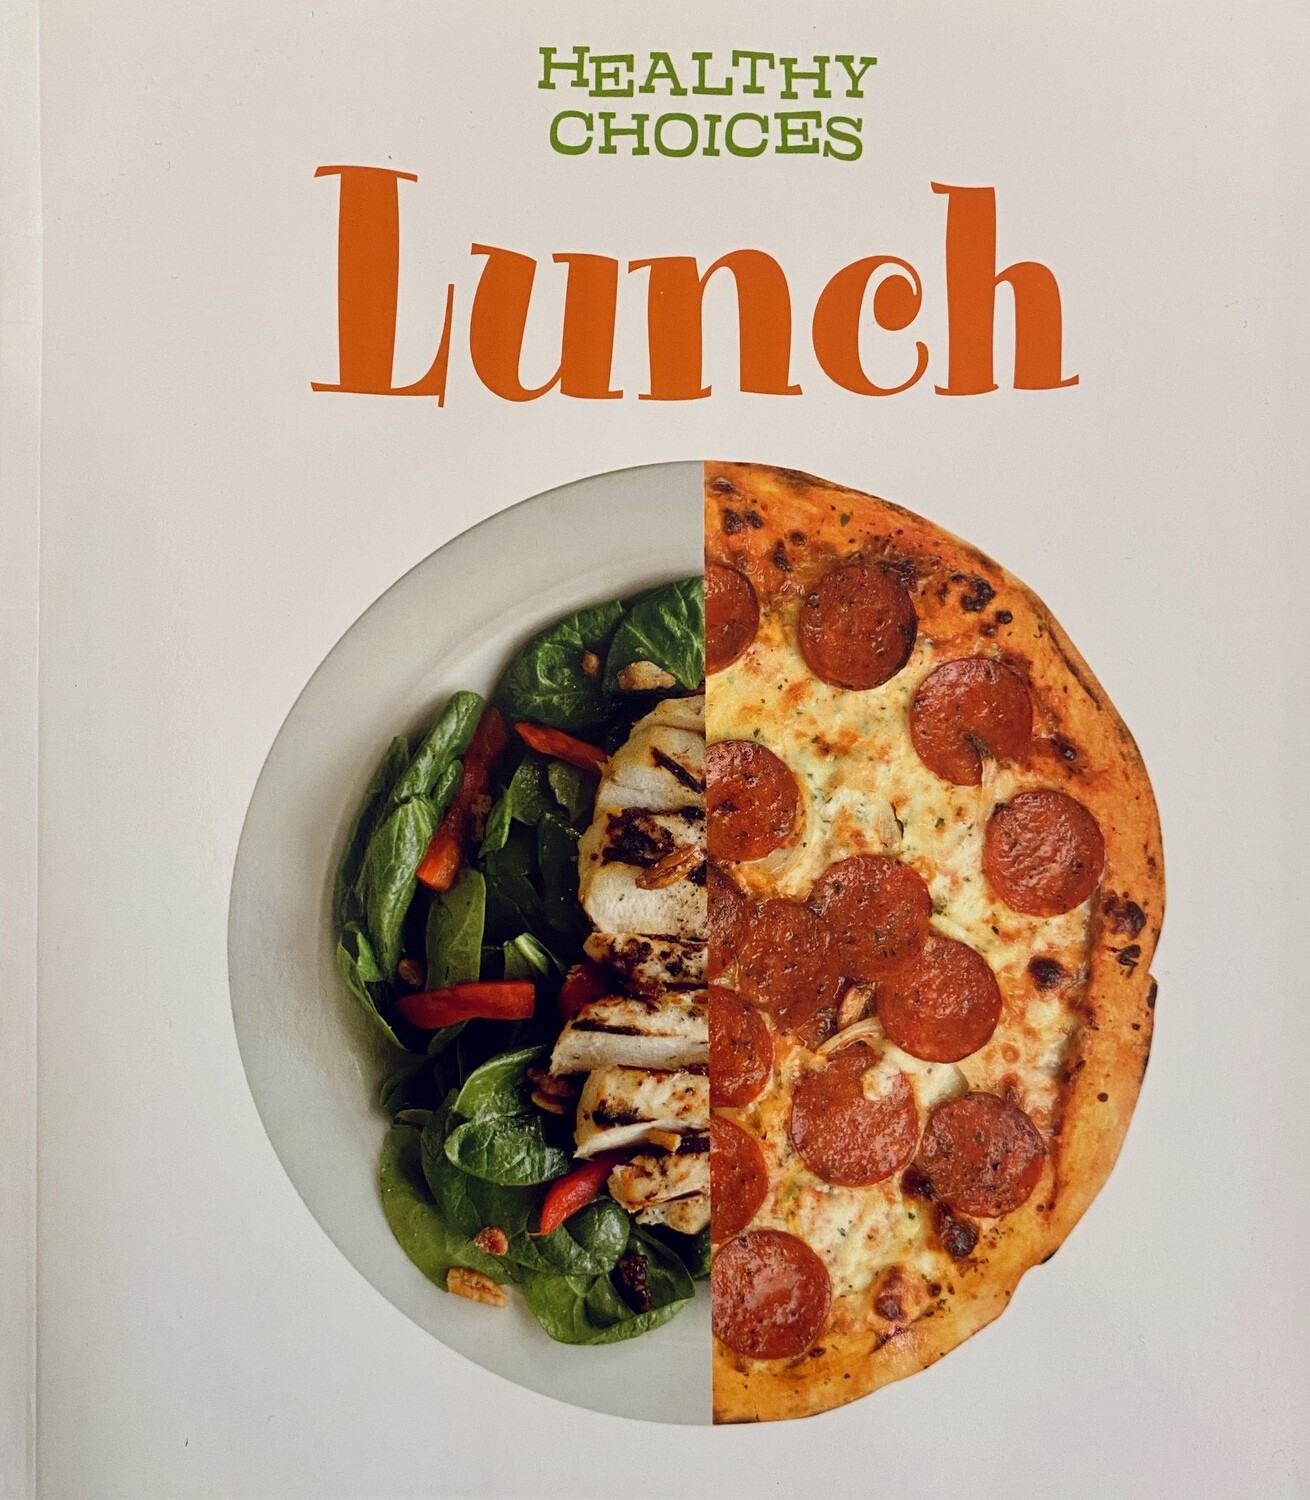 Healthy Choices: Lunch